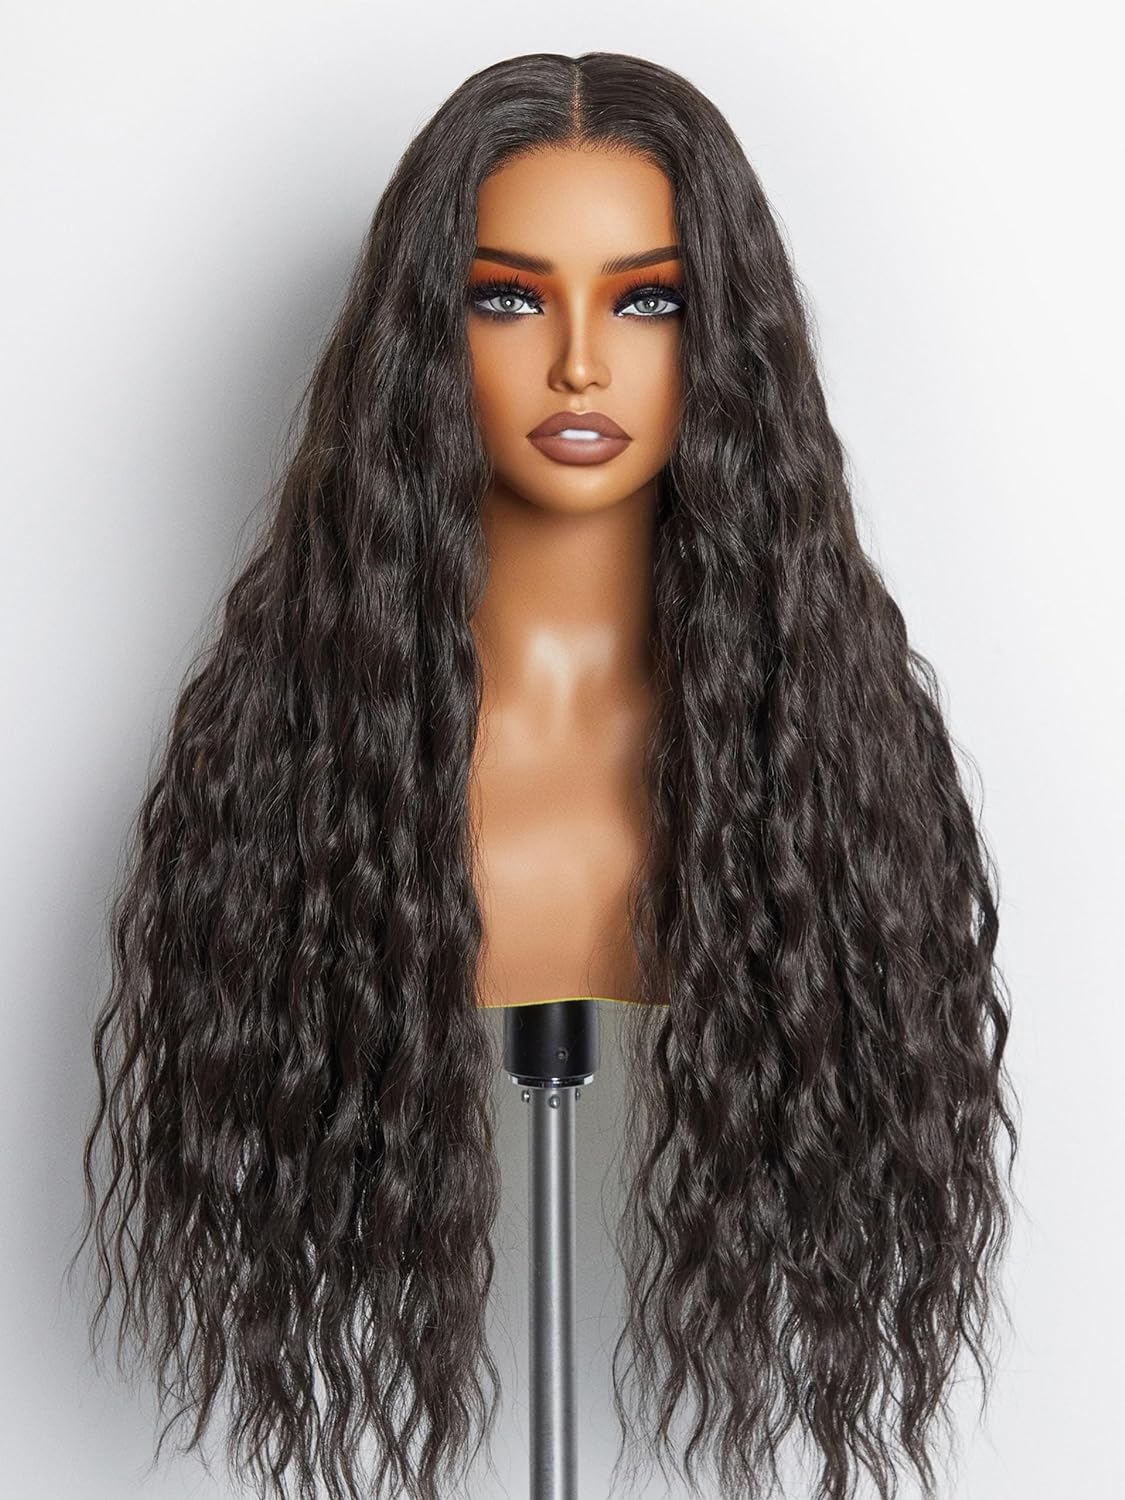 Loose Wave Wig Brown Wig with Blonde Highlights 24 Inch Glueless Colored Honey Blonde Wig, Premium Fiber Remy Human Hair Blended with Natural Pre-Plucked Hairline Pre-Cut Lace